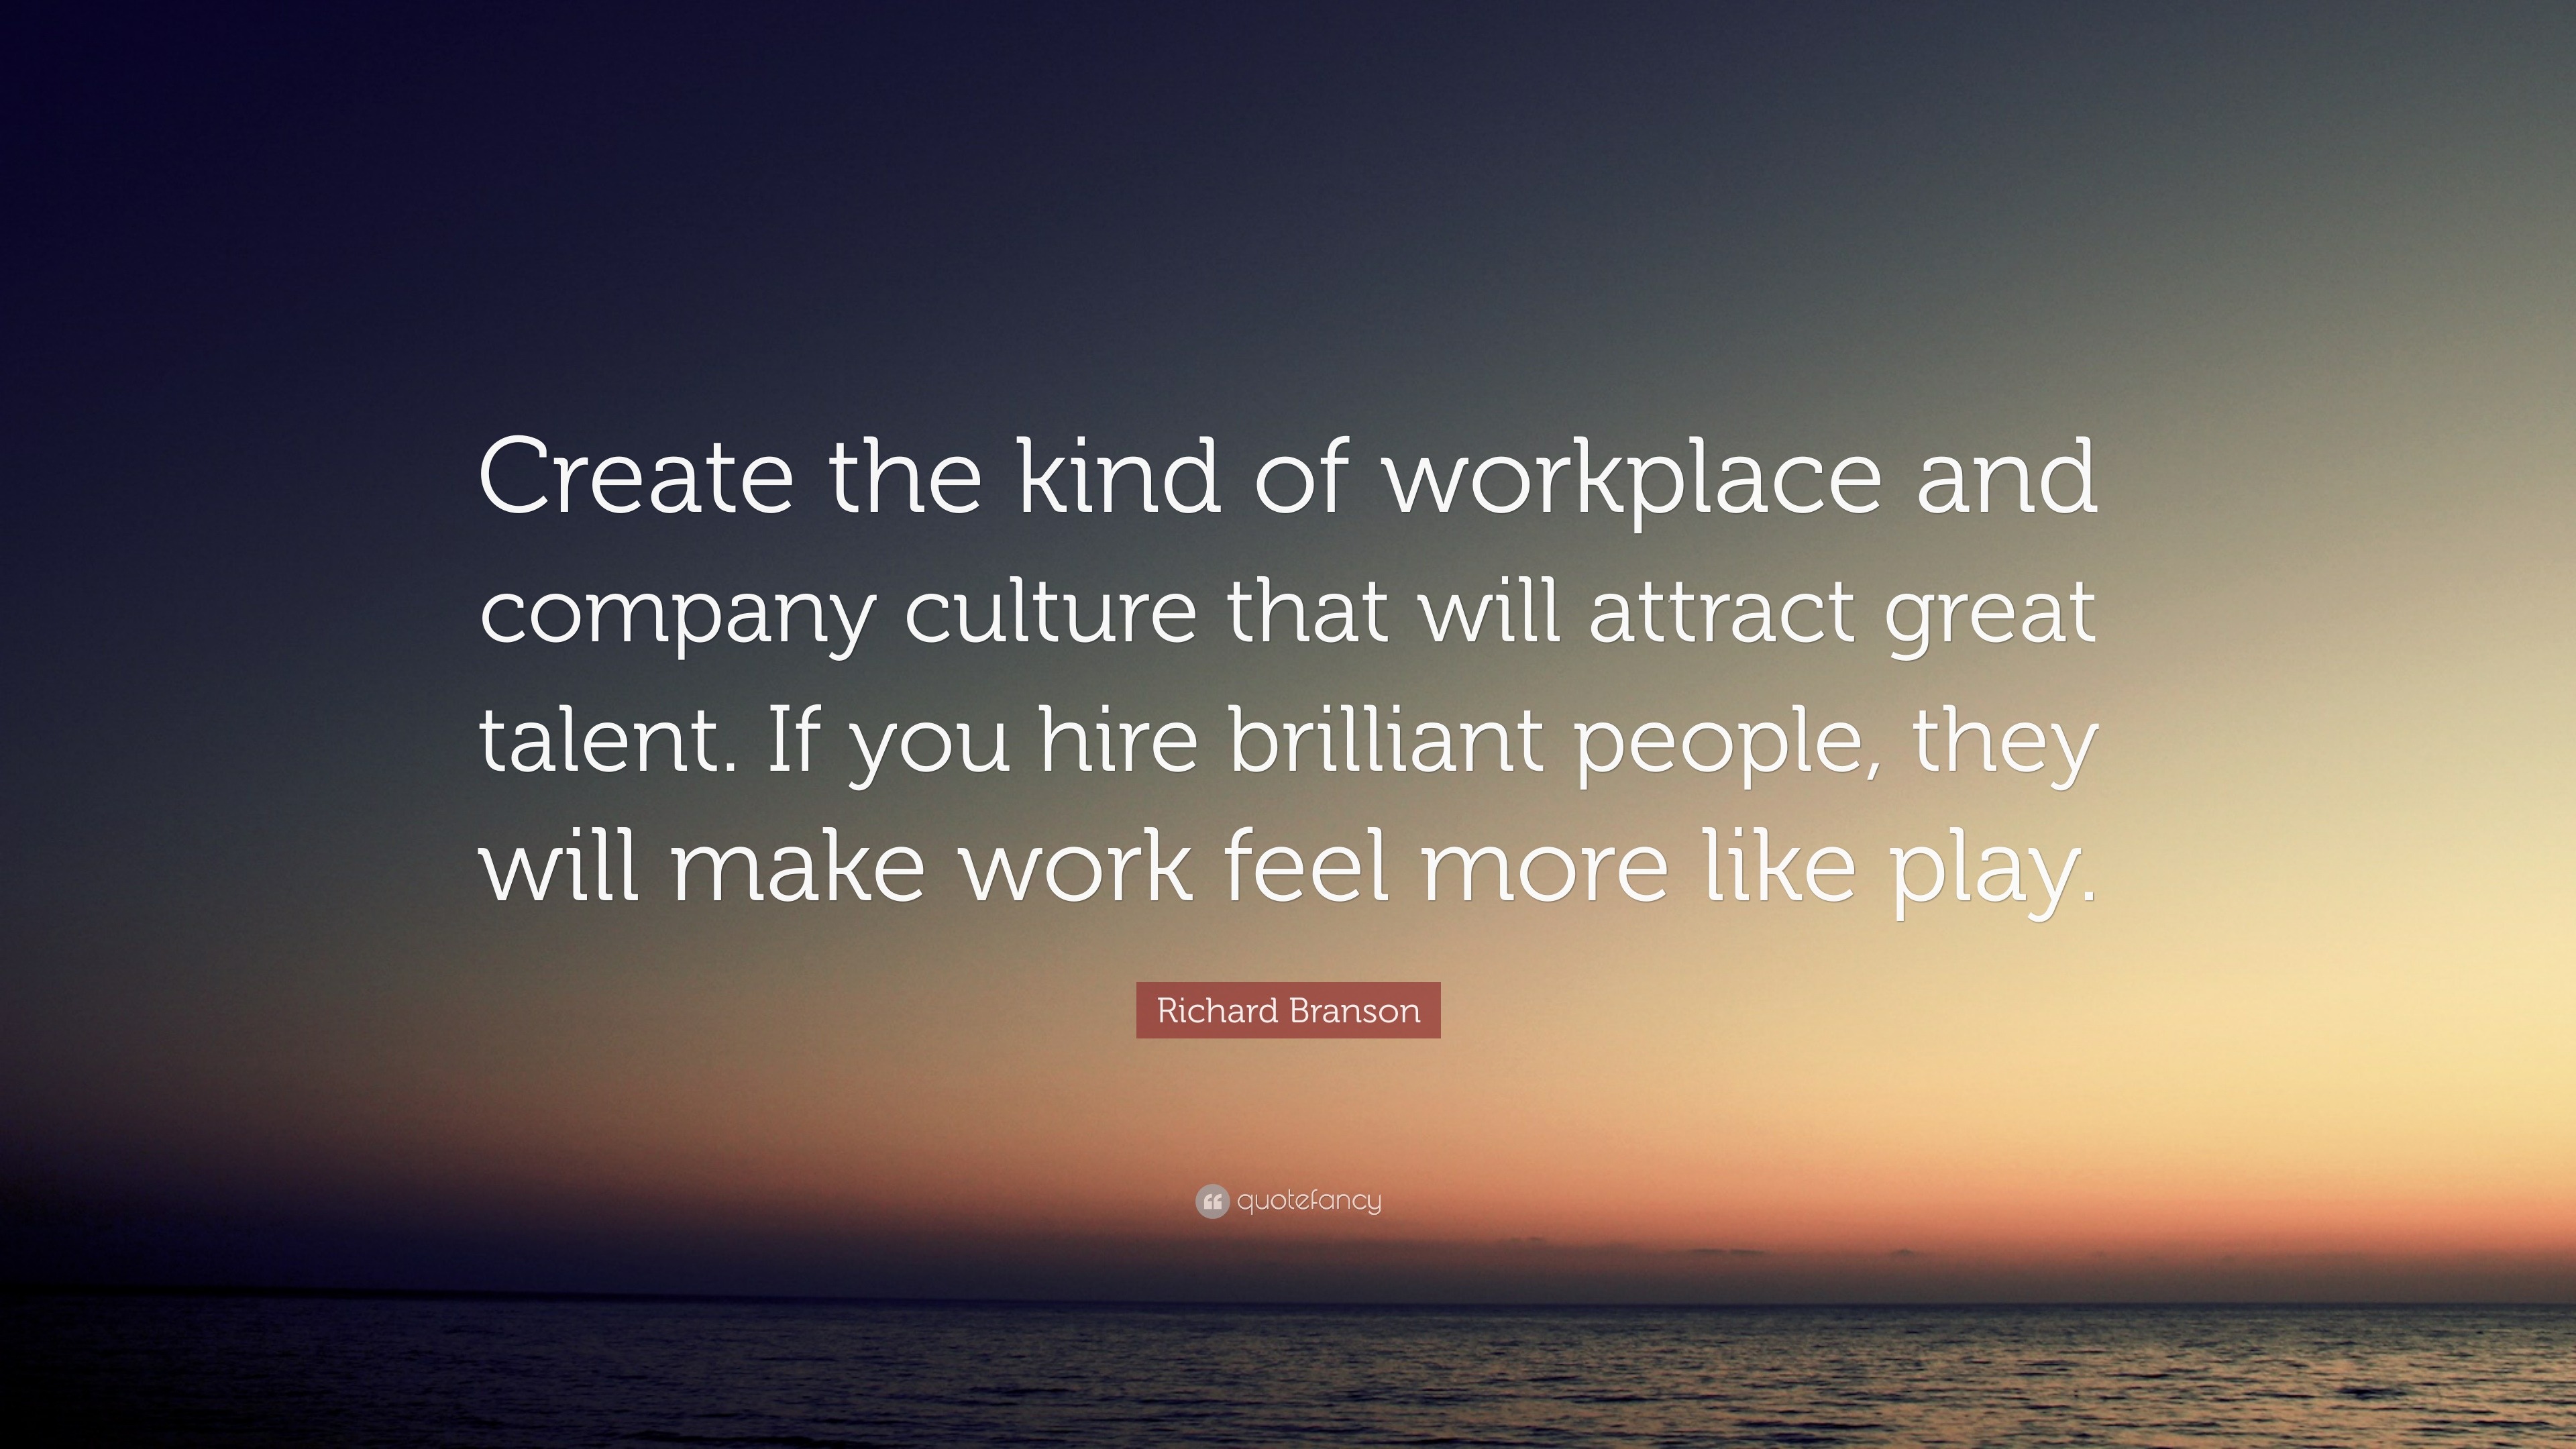 Richard Branson Quote: "Create the kind of workplace and company ...